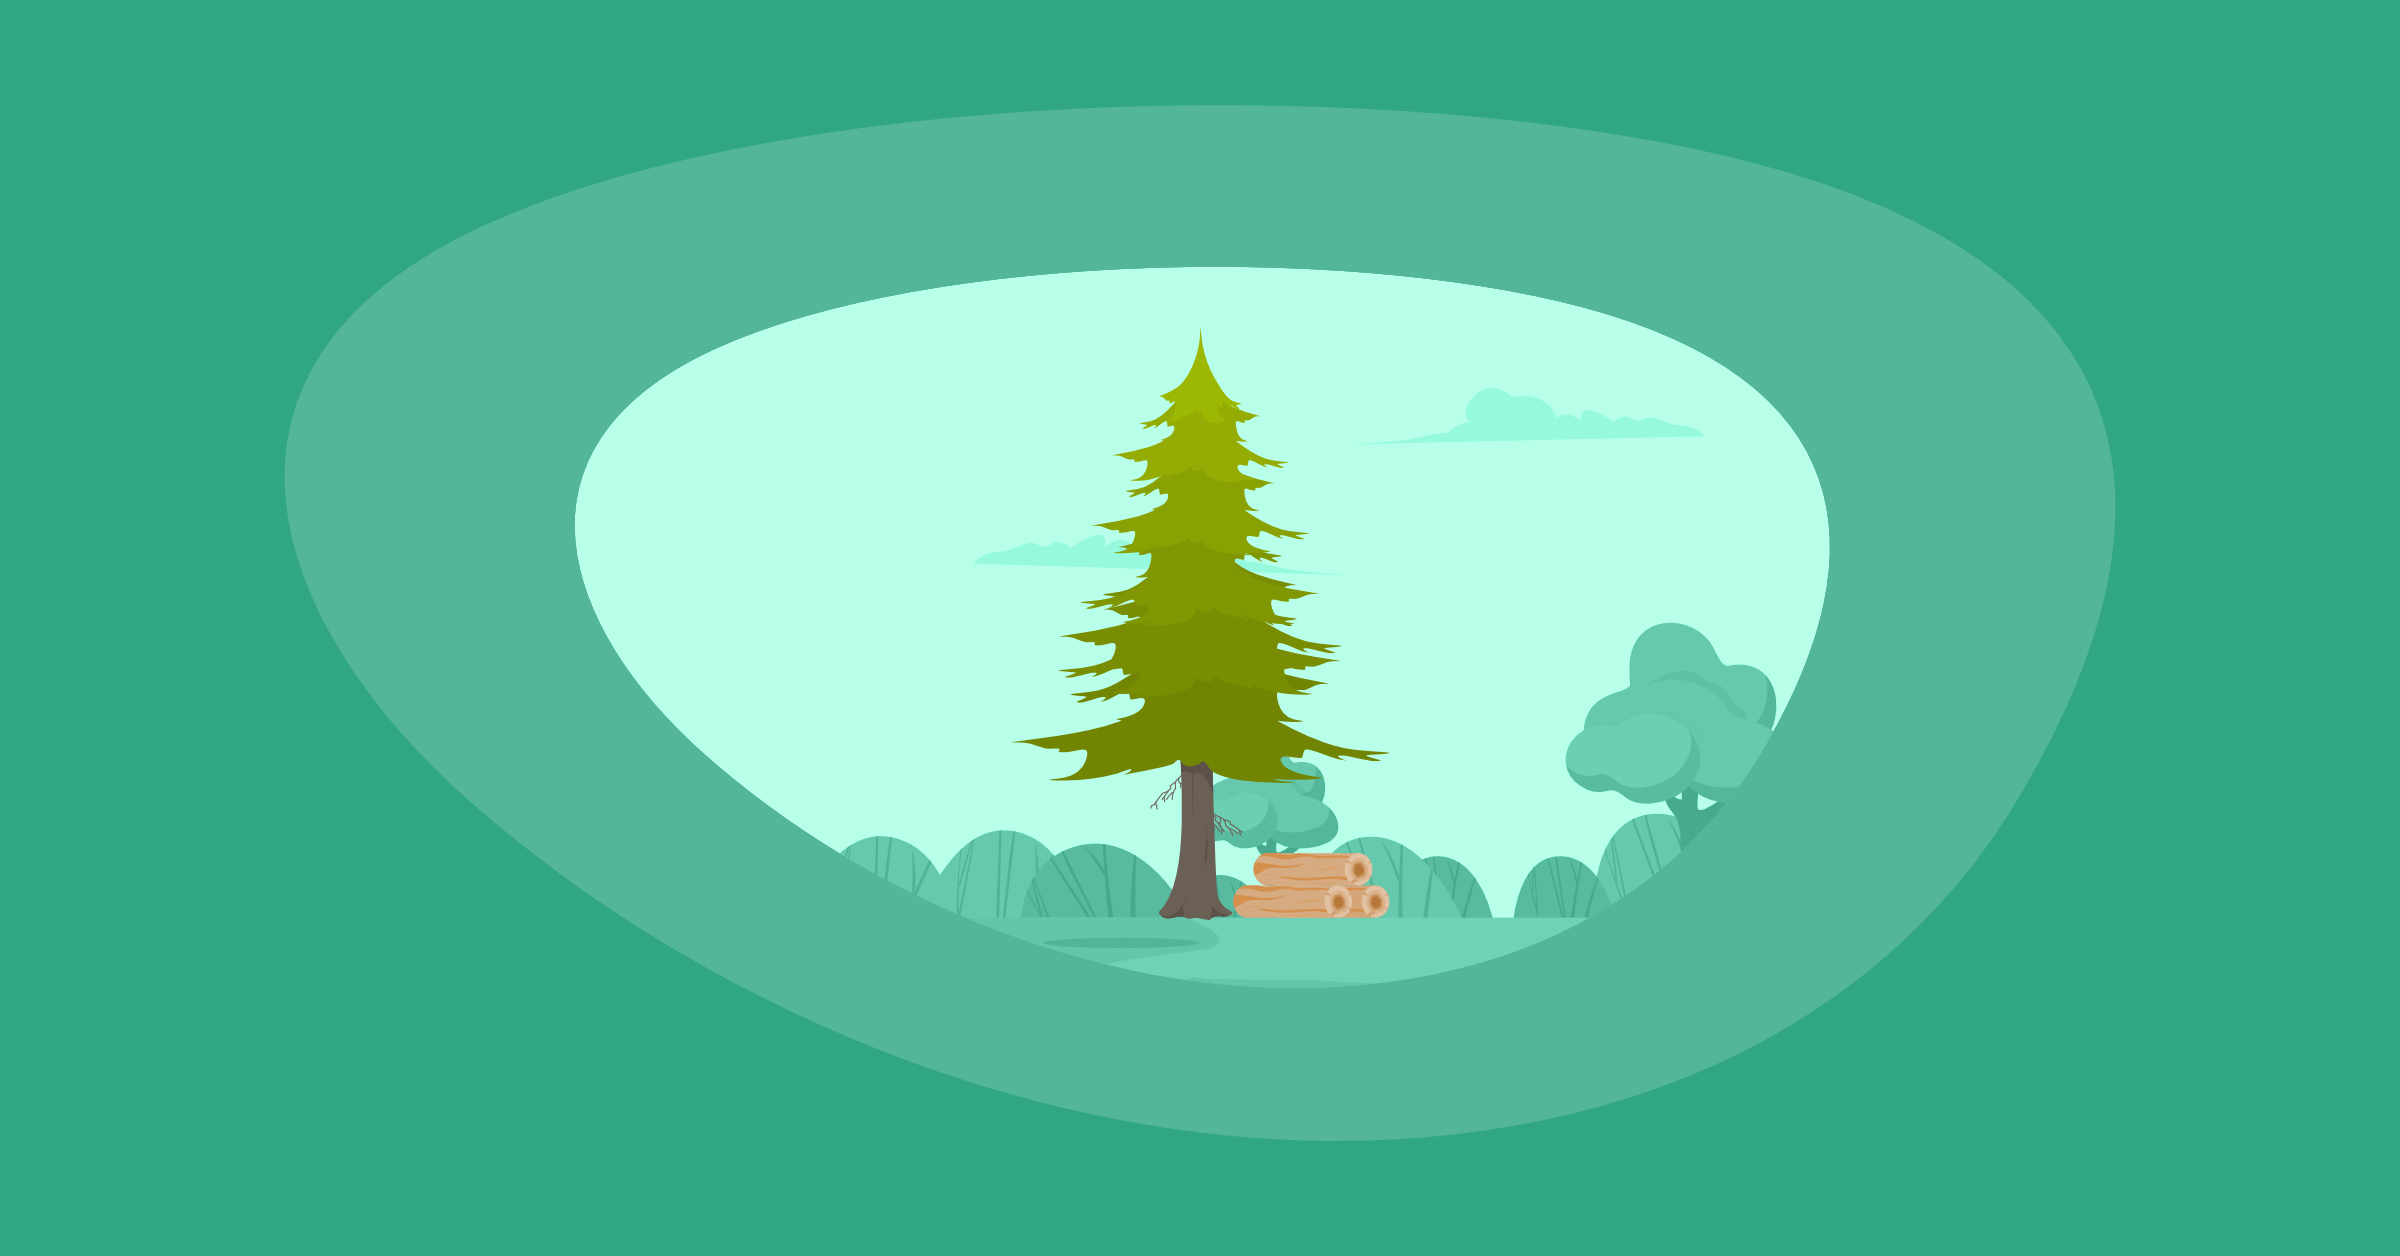 Illustration of a Douglas fir tree and wood